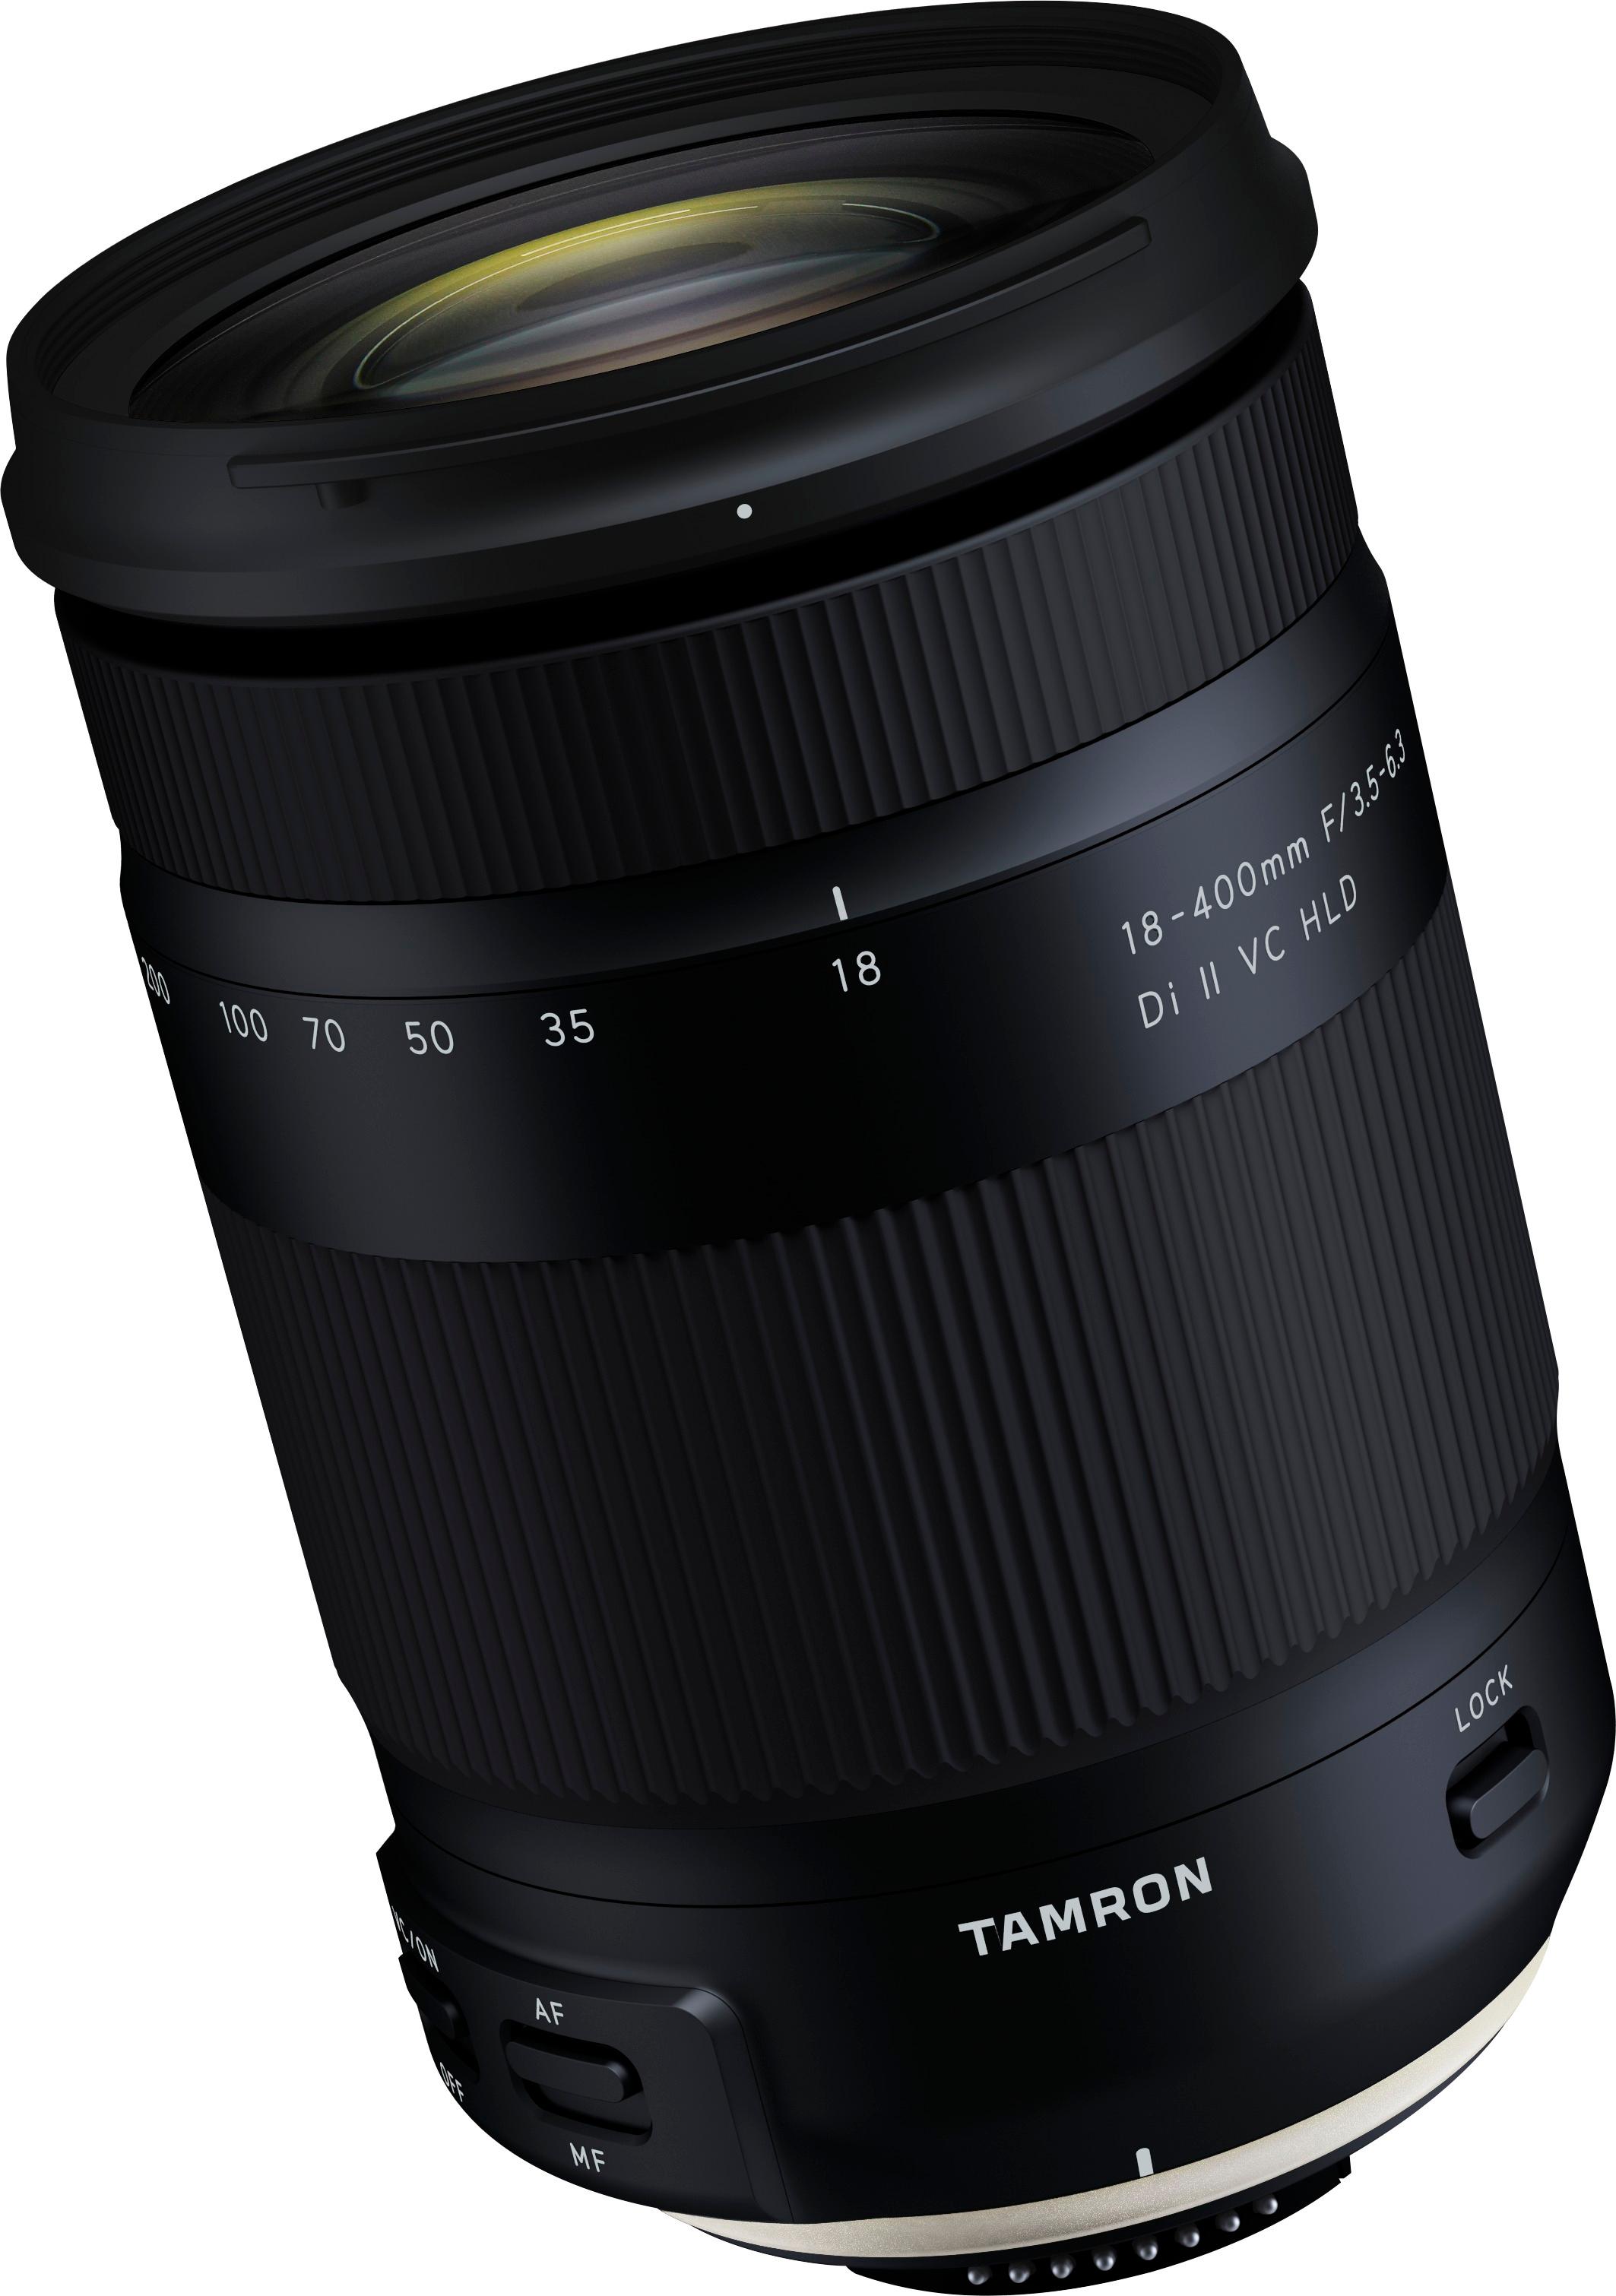 Angle View: Canon - EF-S18-135mm F3.5-5.6 IS USM Standard Zoom Lens for EOS DSLR Cameras - Black